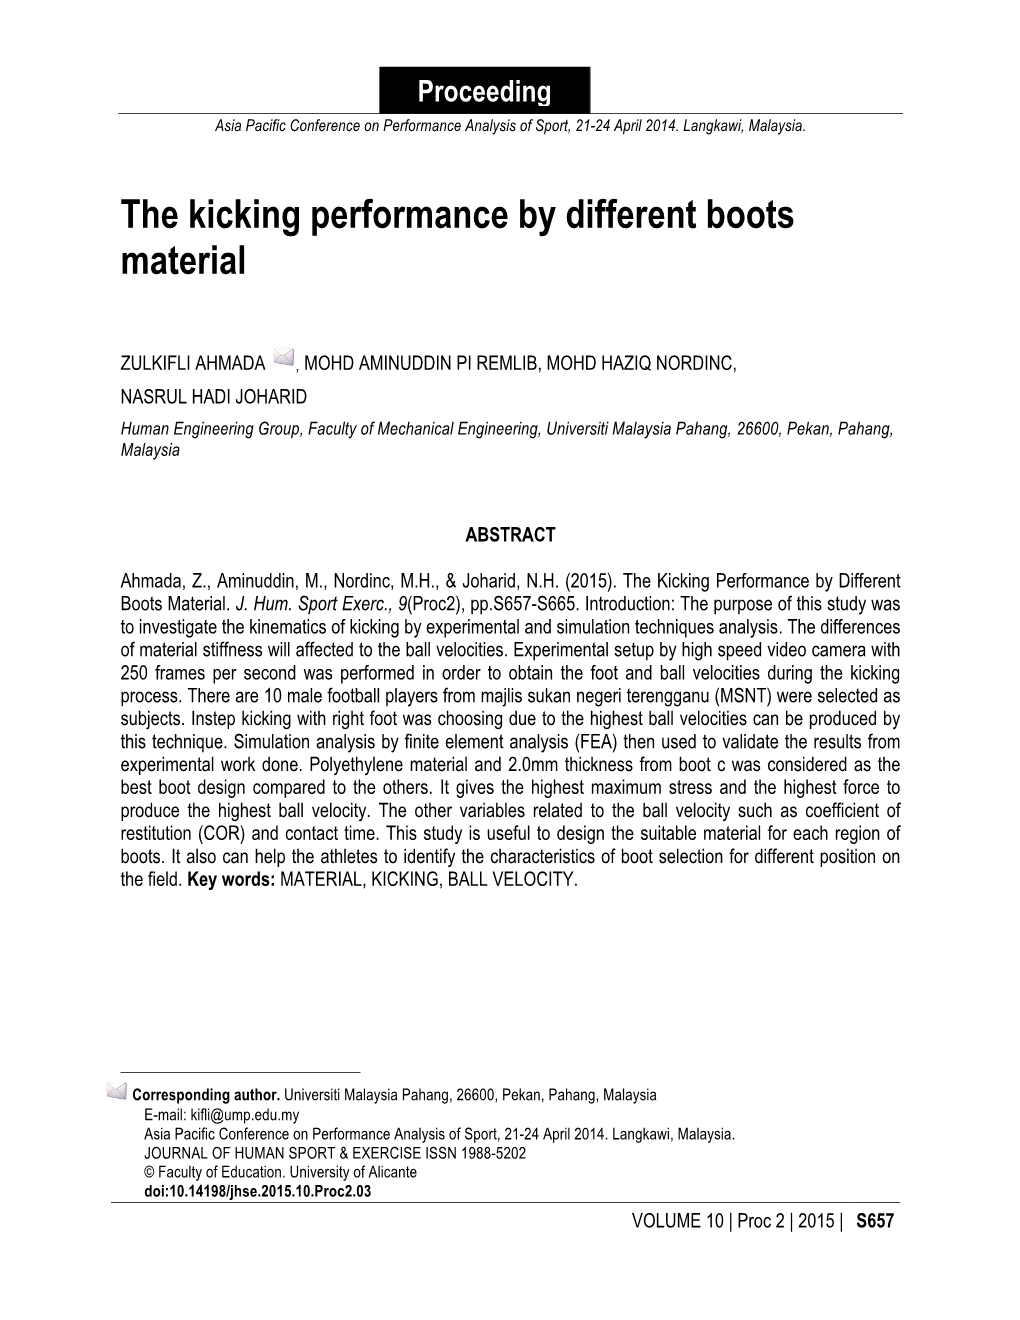 The Kicking Performance by Different Boots Material